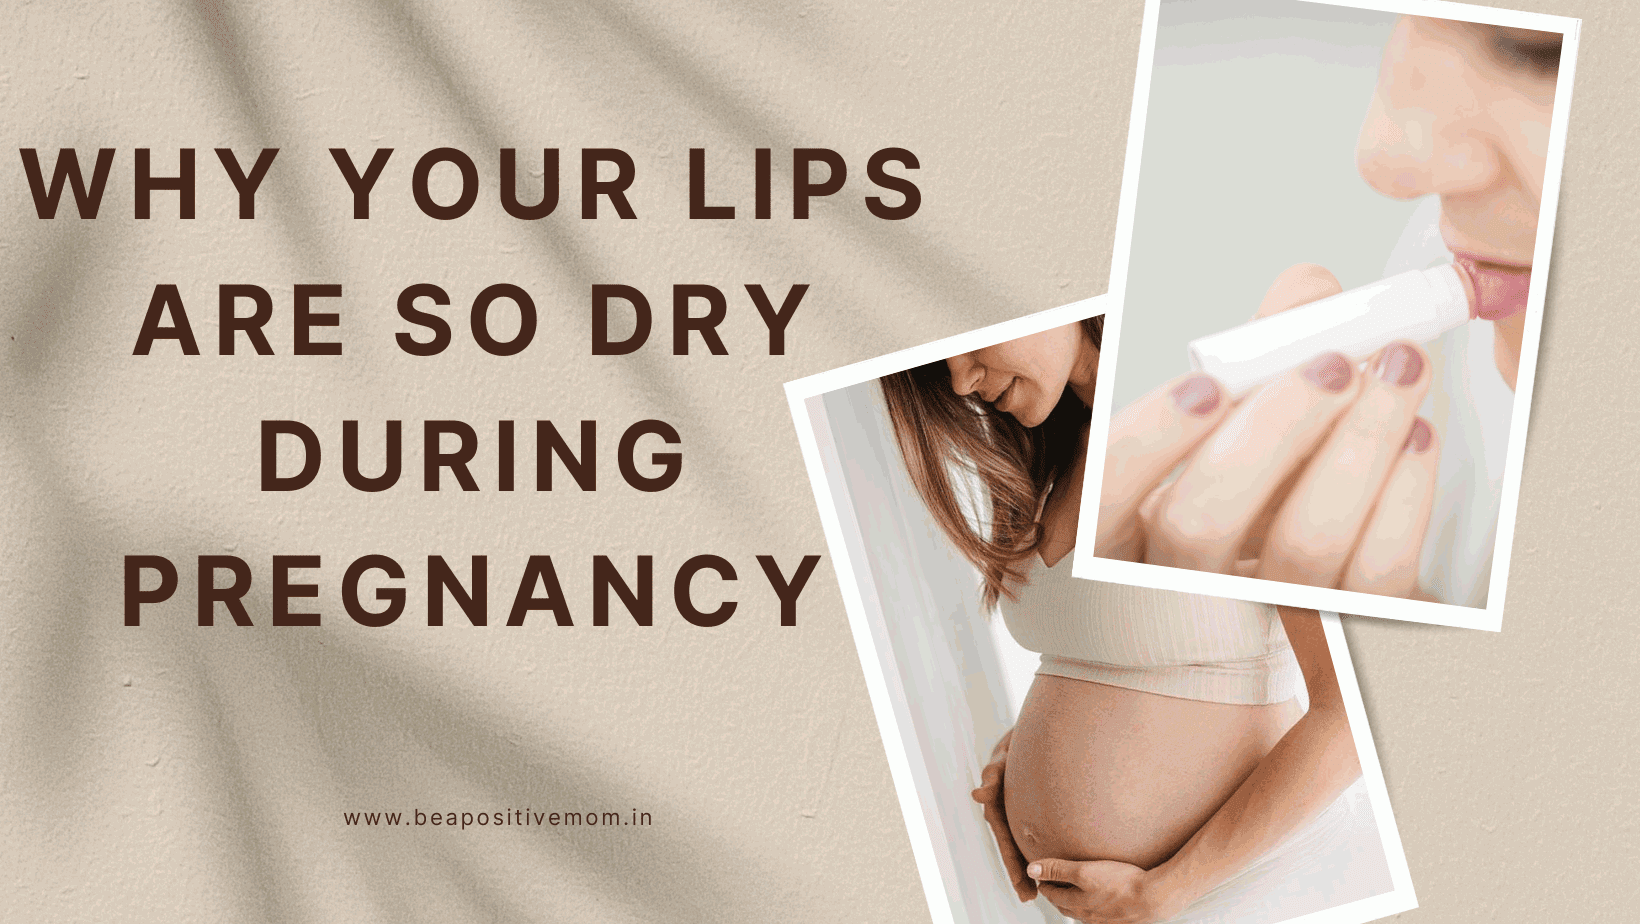 Why Your Lips Are So Dry During Pregnancy and How to Find Relief